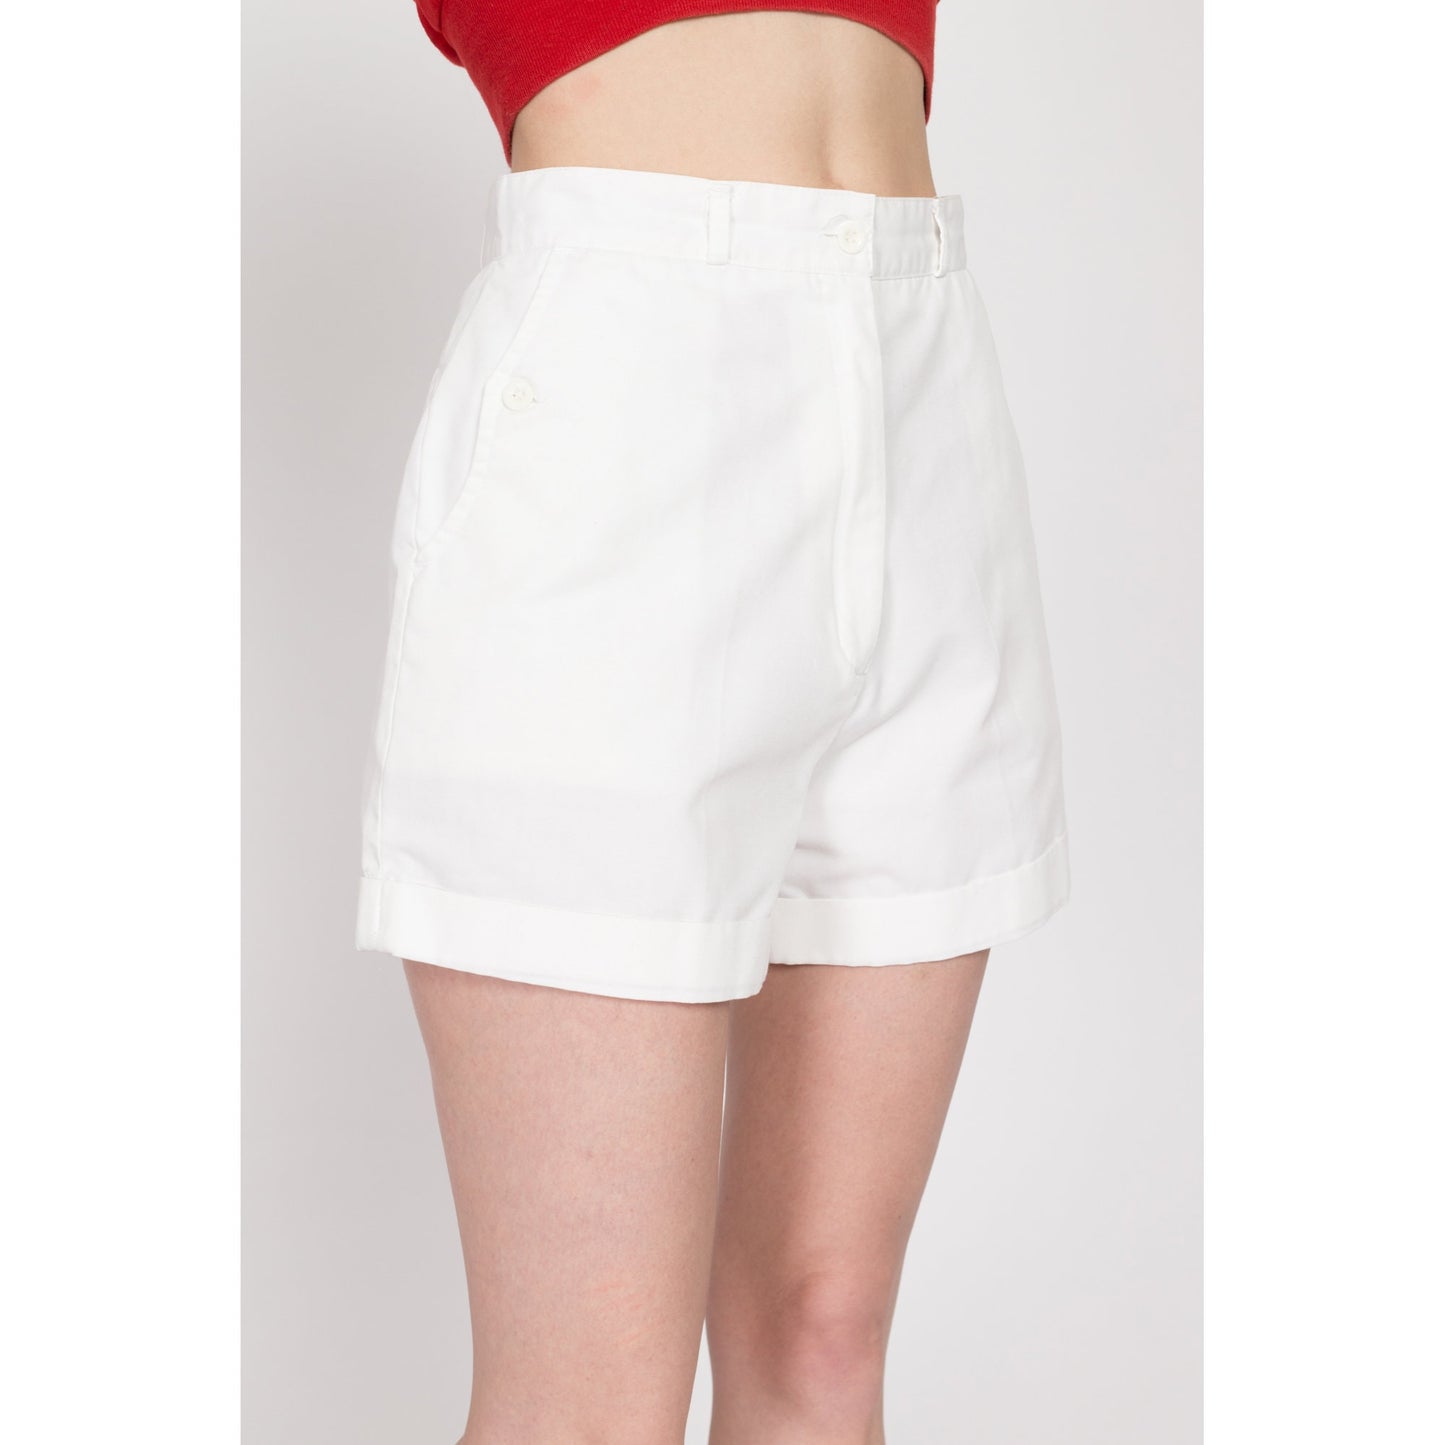 Small 80s White High Waisted Shorts 26.5" | Vintage Cuffed Cotton Blend Summer Shorts